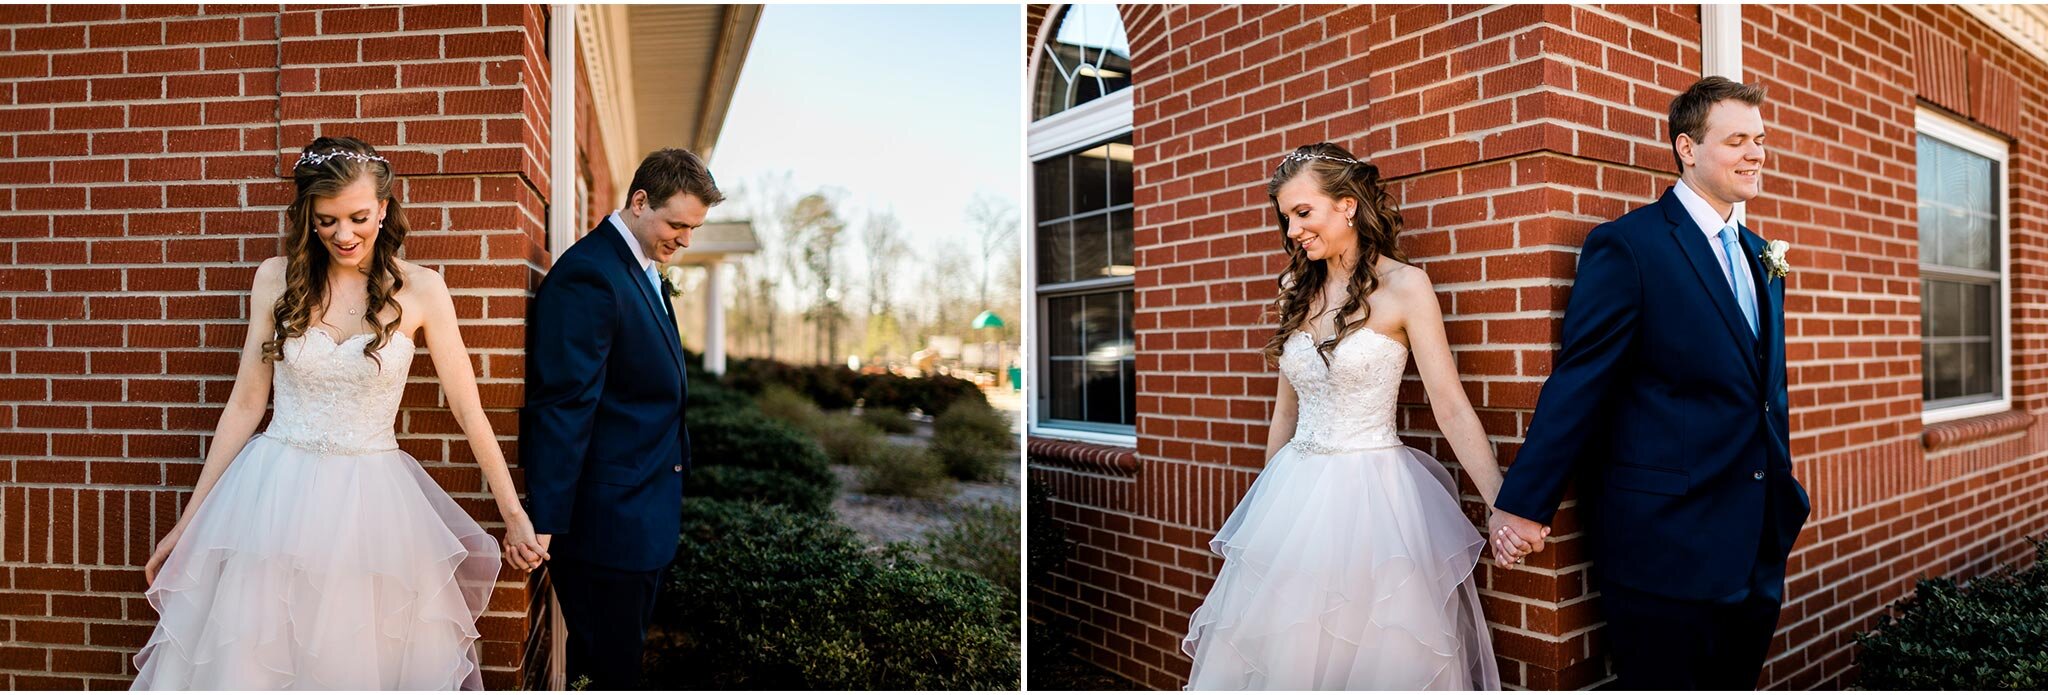 Durham Wedding Photographer | By G. Lin Photography | Bride and groom praying together